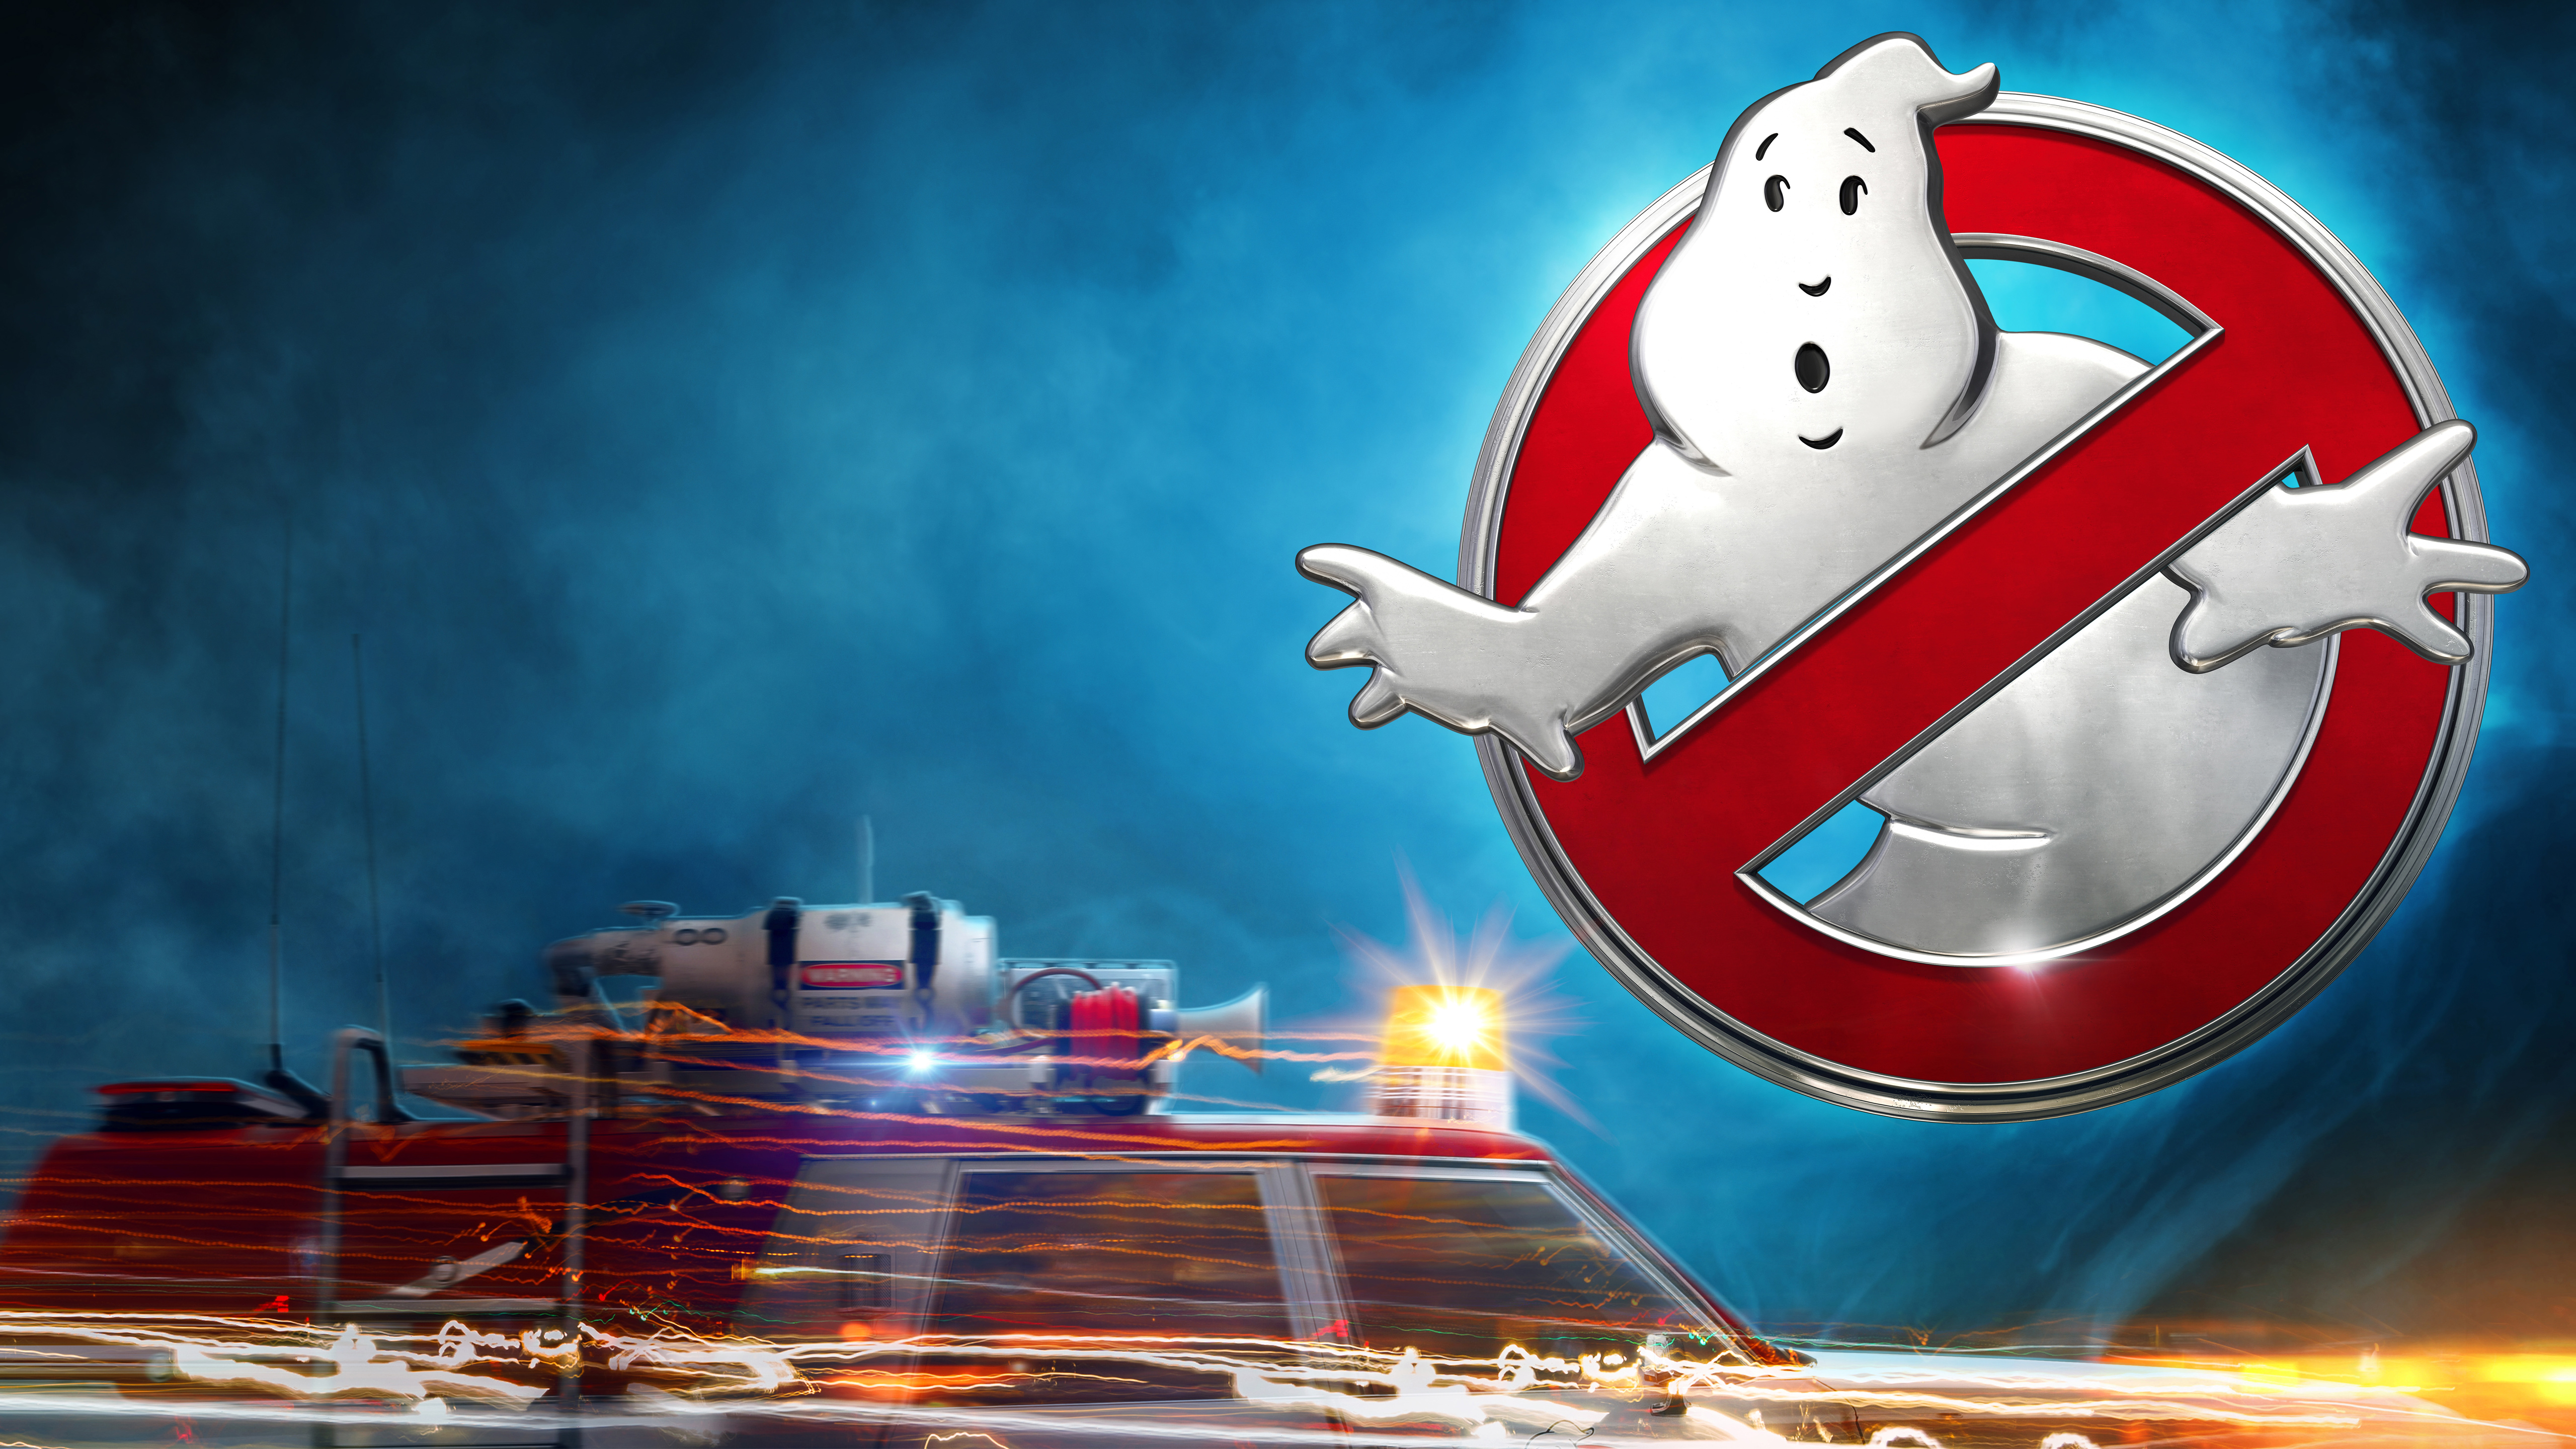 ghostbusters wallpaper,cartoon,illustration,animation,fictional character,vehicle